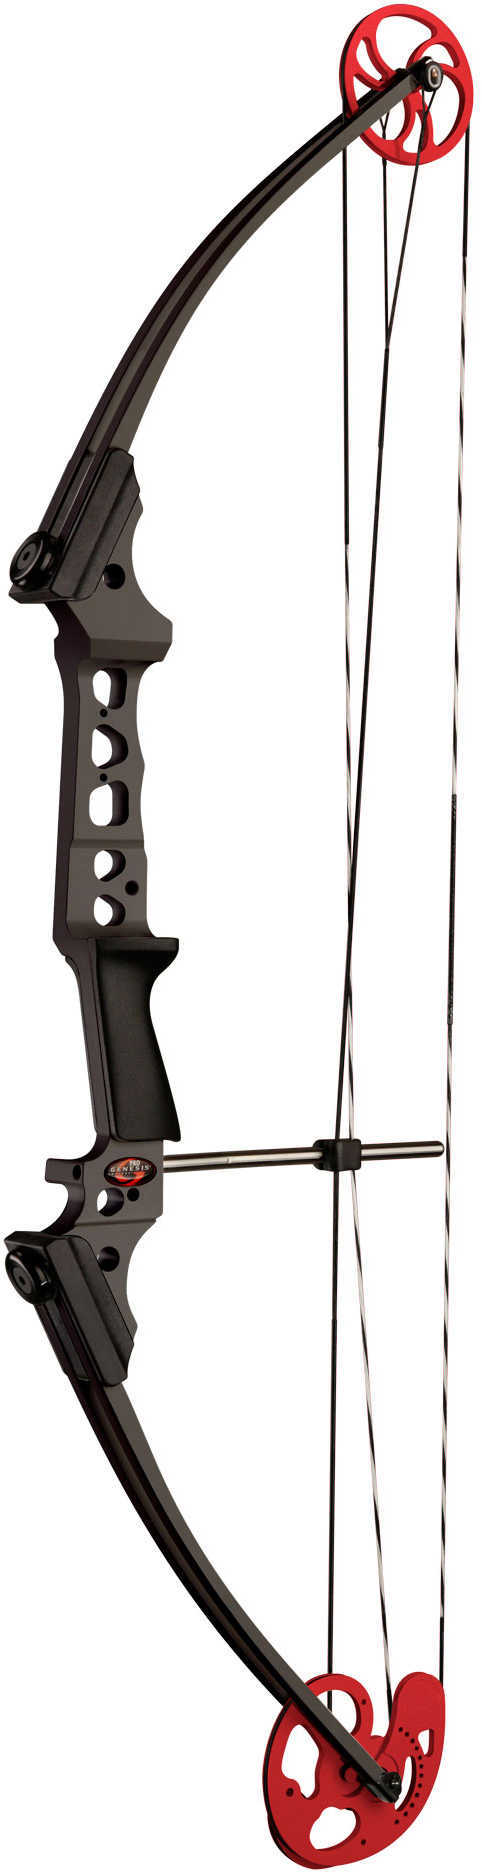 Genesis Pro Bow Right Handed, Black With Red Camo 10496A